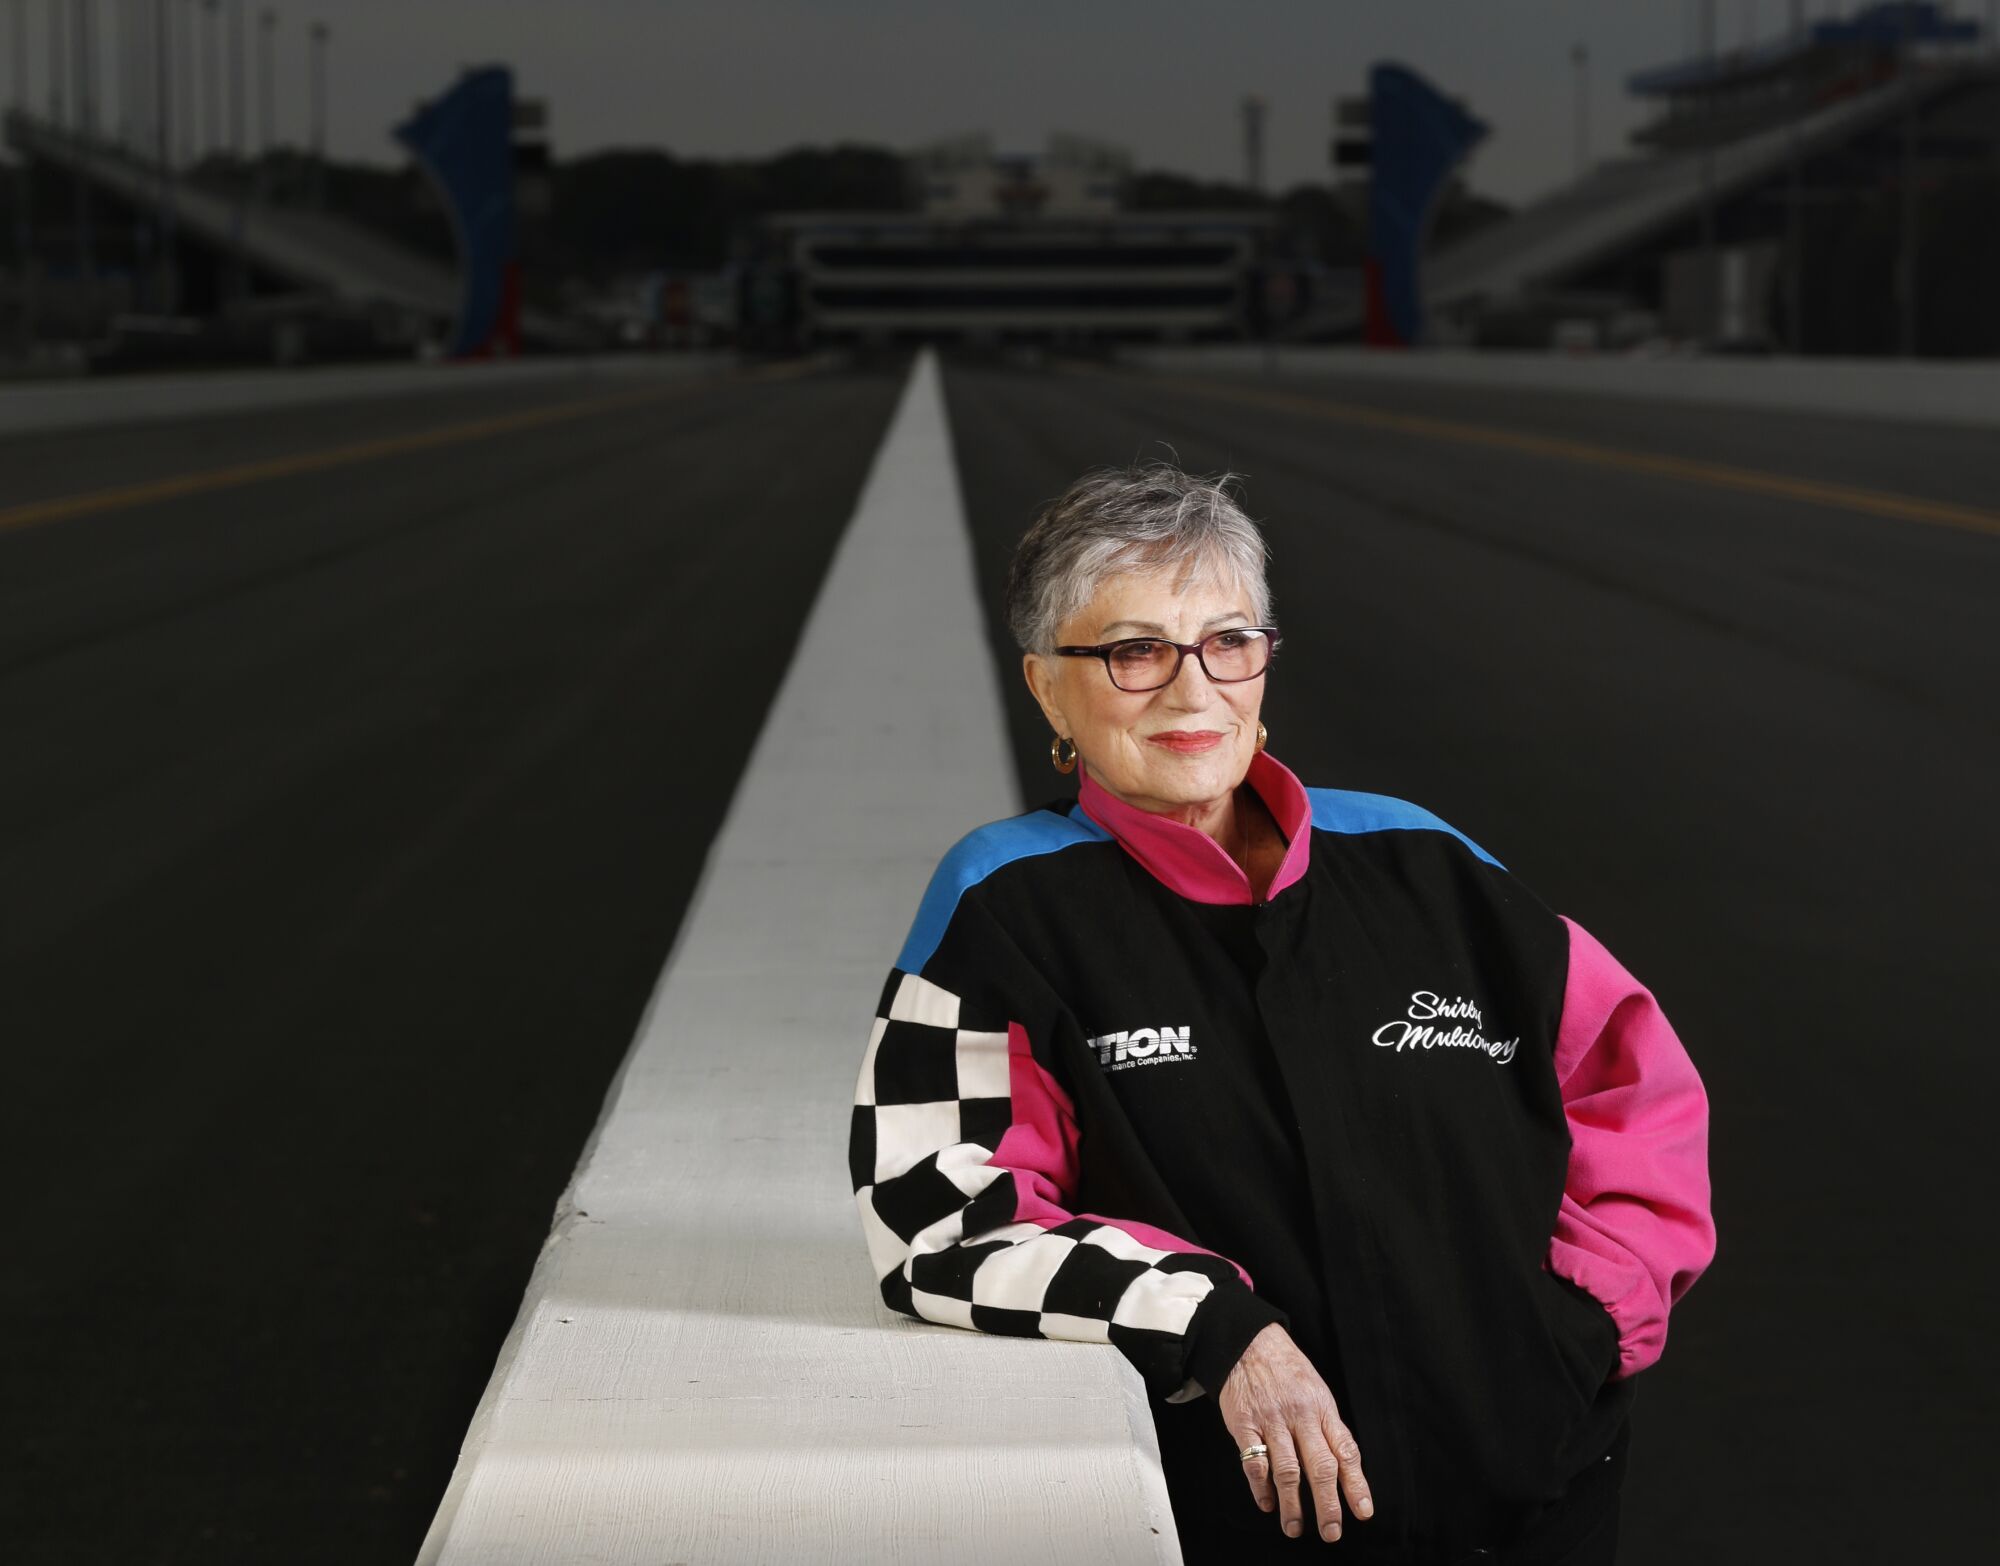 Muldowney she was inducted in 1990 into the Motorsports Hall of Fame of America. Photographed at the zMAX Dragway in Concord, North Carolina.